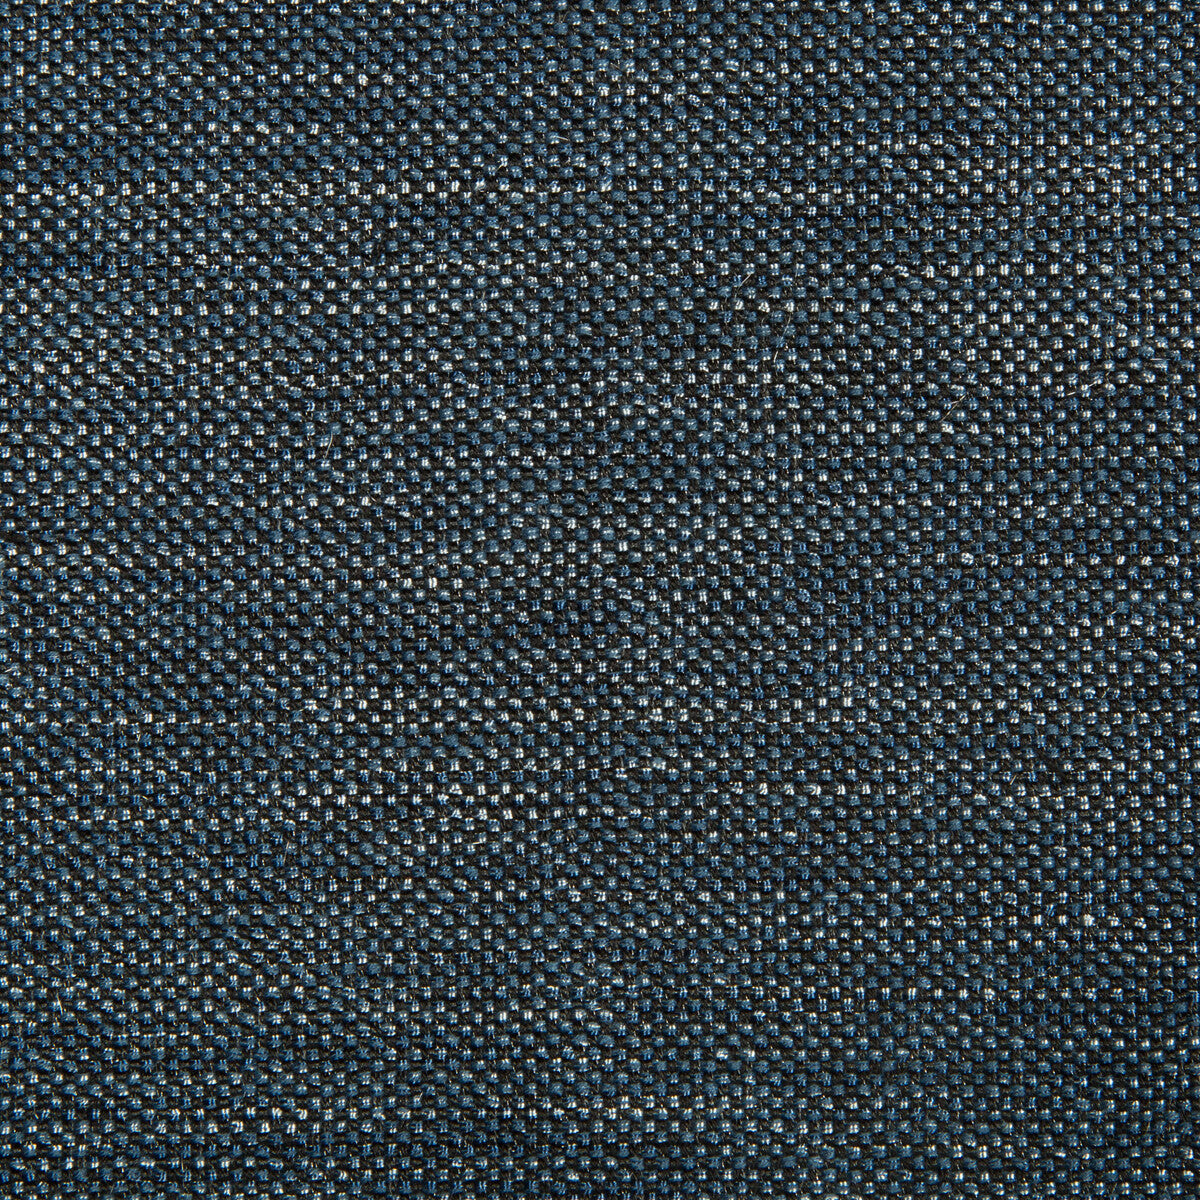 Kravet Contract fabric in 4458-50 color - pattern 4458.50.0 - by Kravet Contract